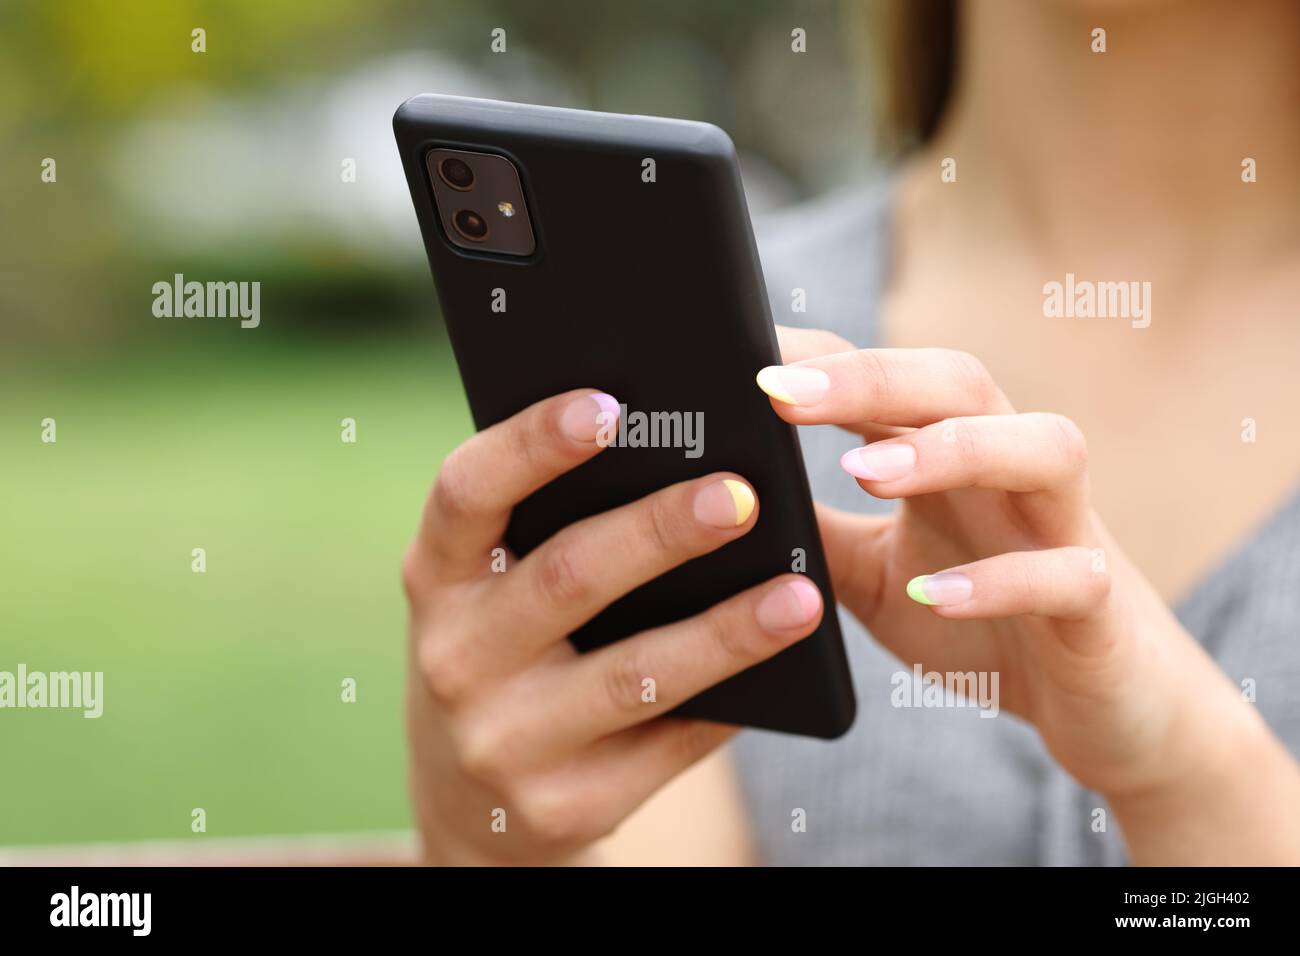 Woman hands close up using smart phone standing in a park Stock Photo